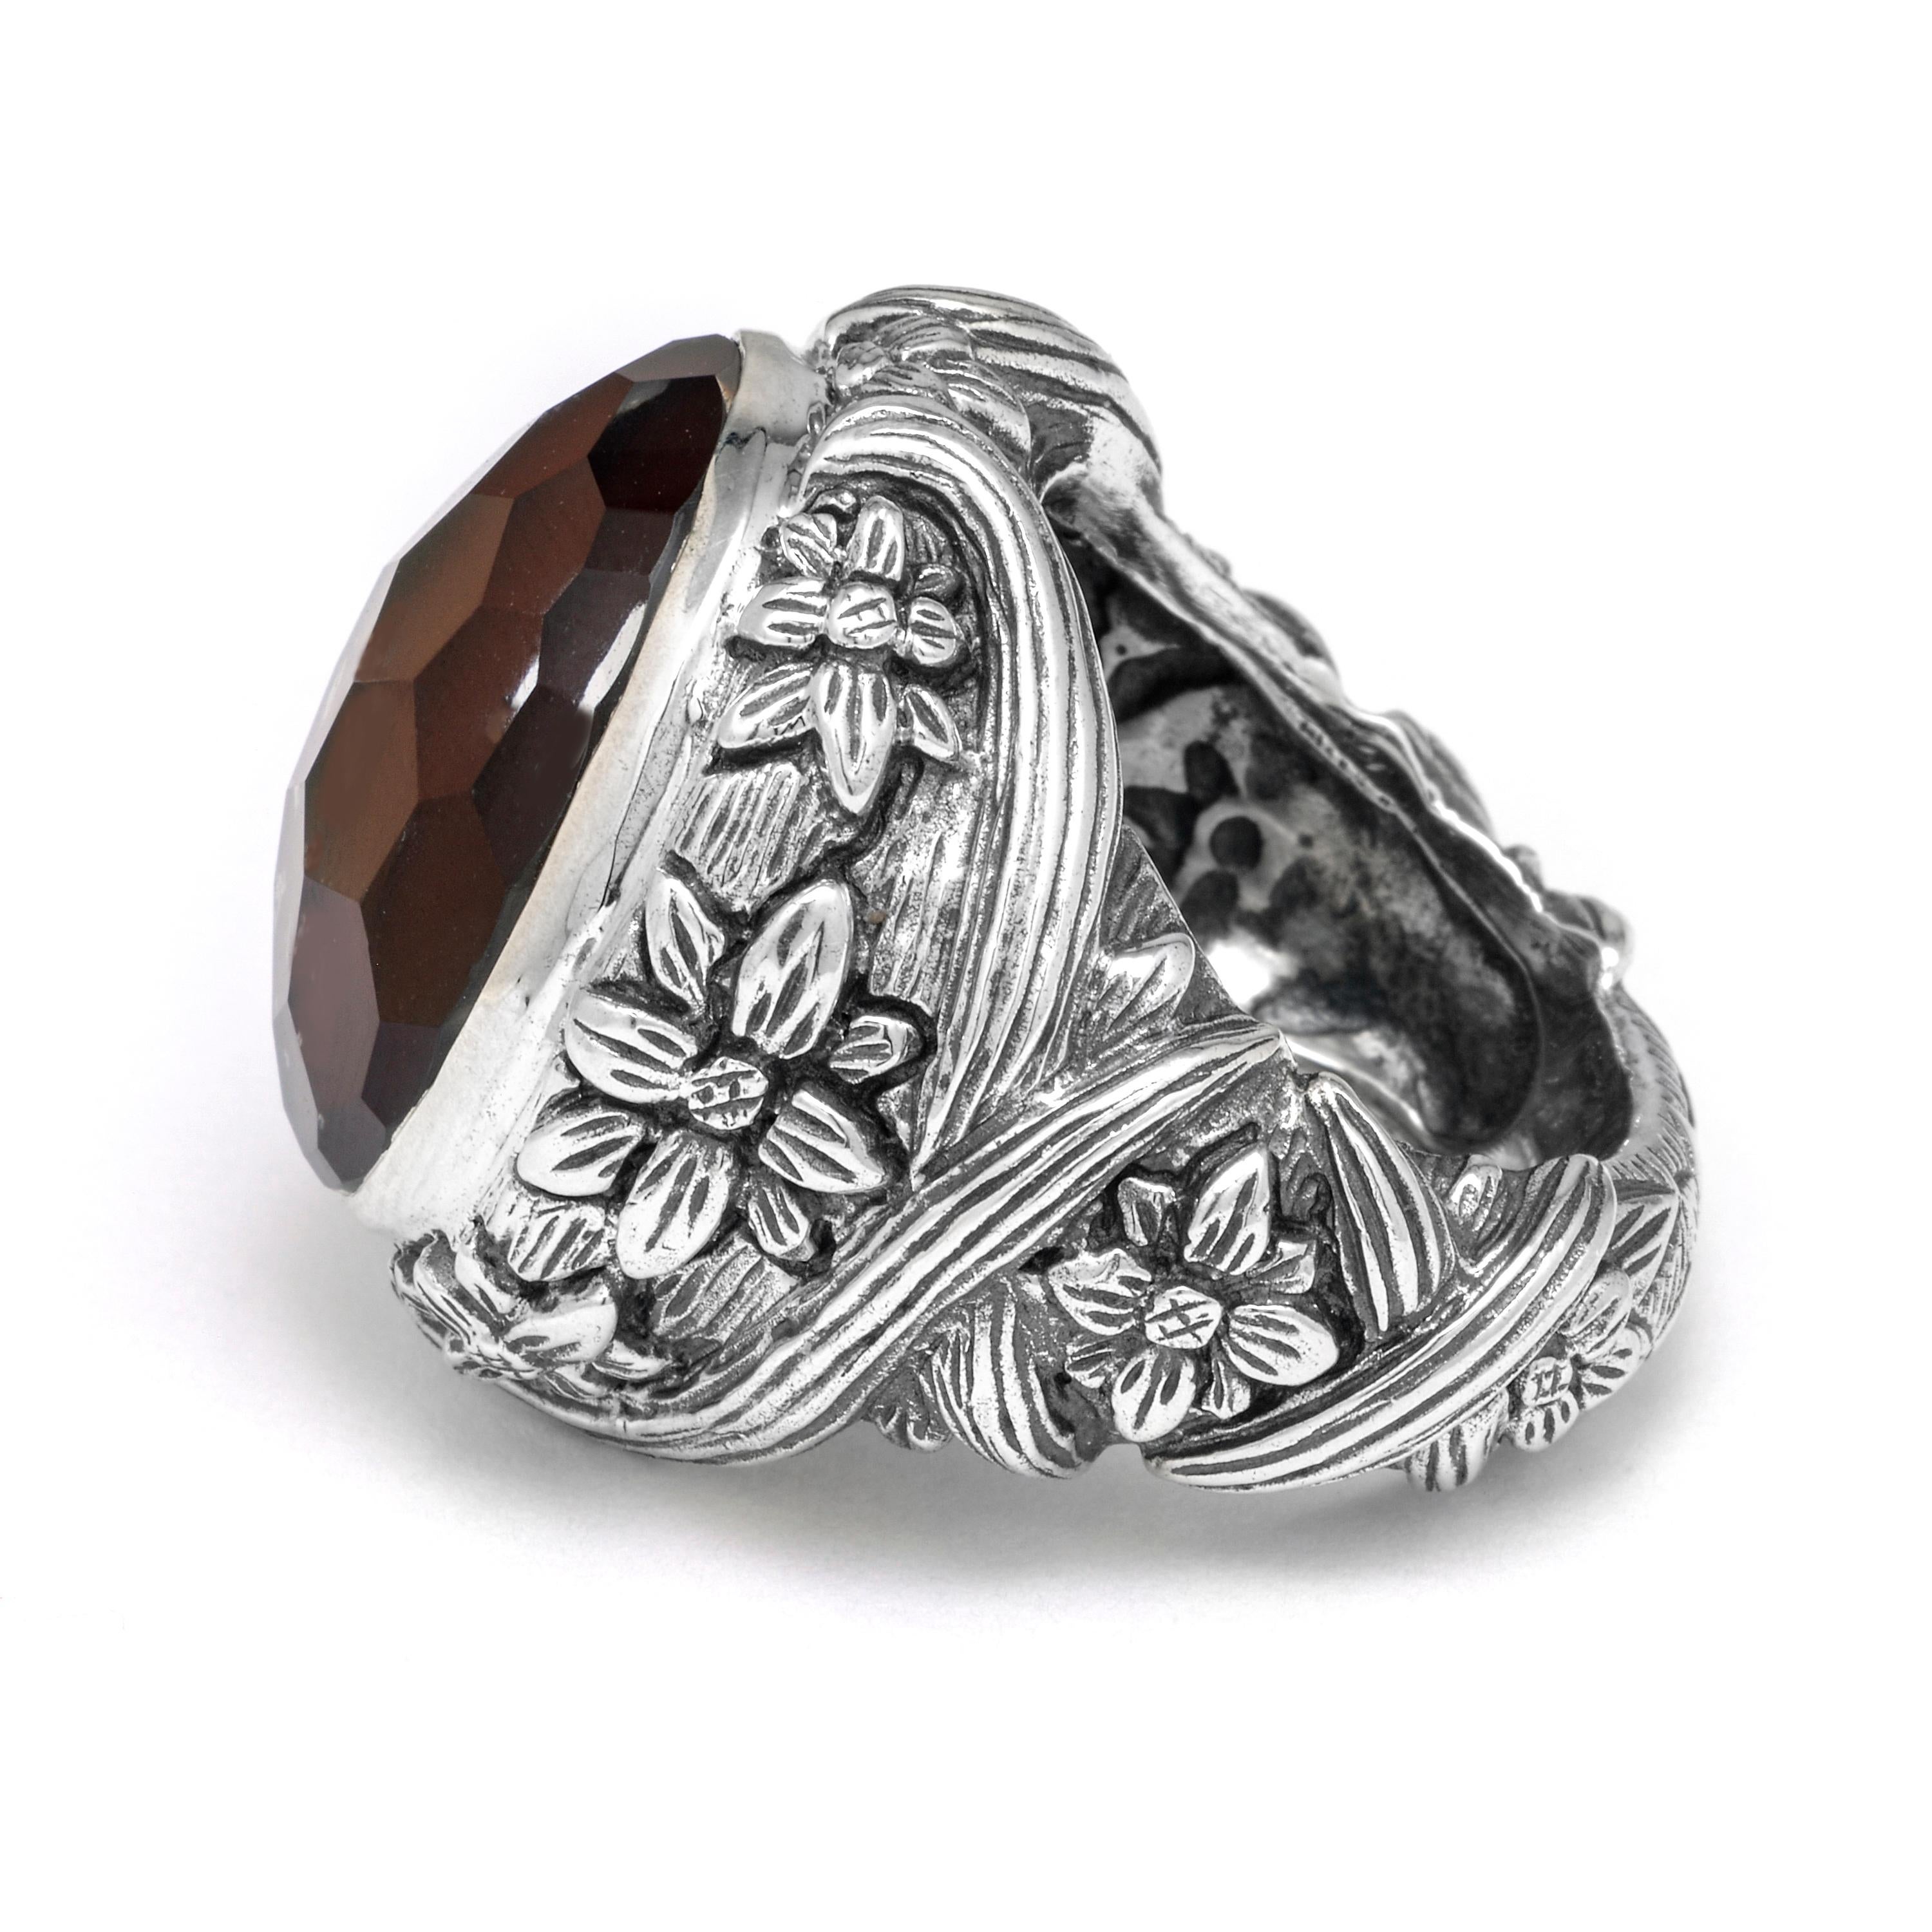 This dramatic Stephen Dweck Sterling Silver Dome Ring features a faceted Smoky Quartz and Mother of Pearl doublet (18mm x 21mm) enhanced with wrapping vines and floral details of sterling silver. Drawing inspiration from a love of nature and passion